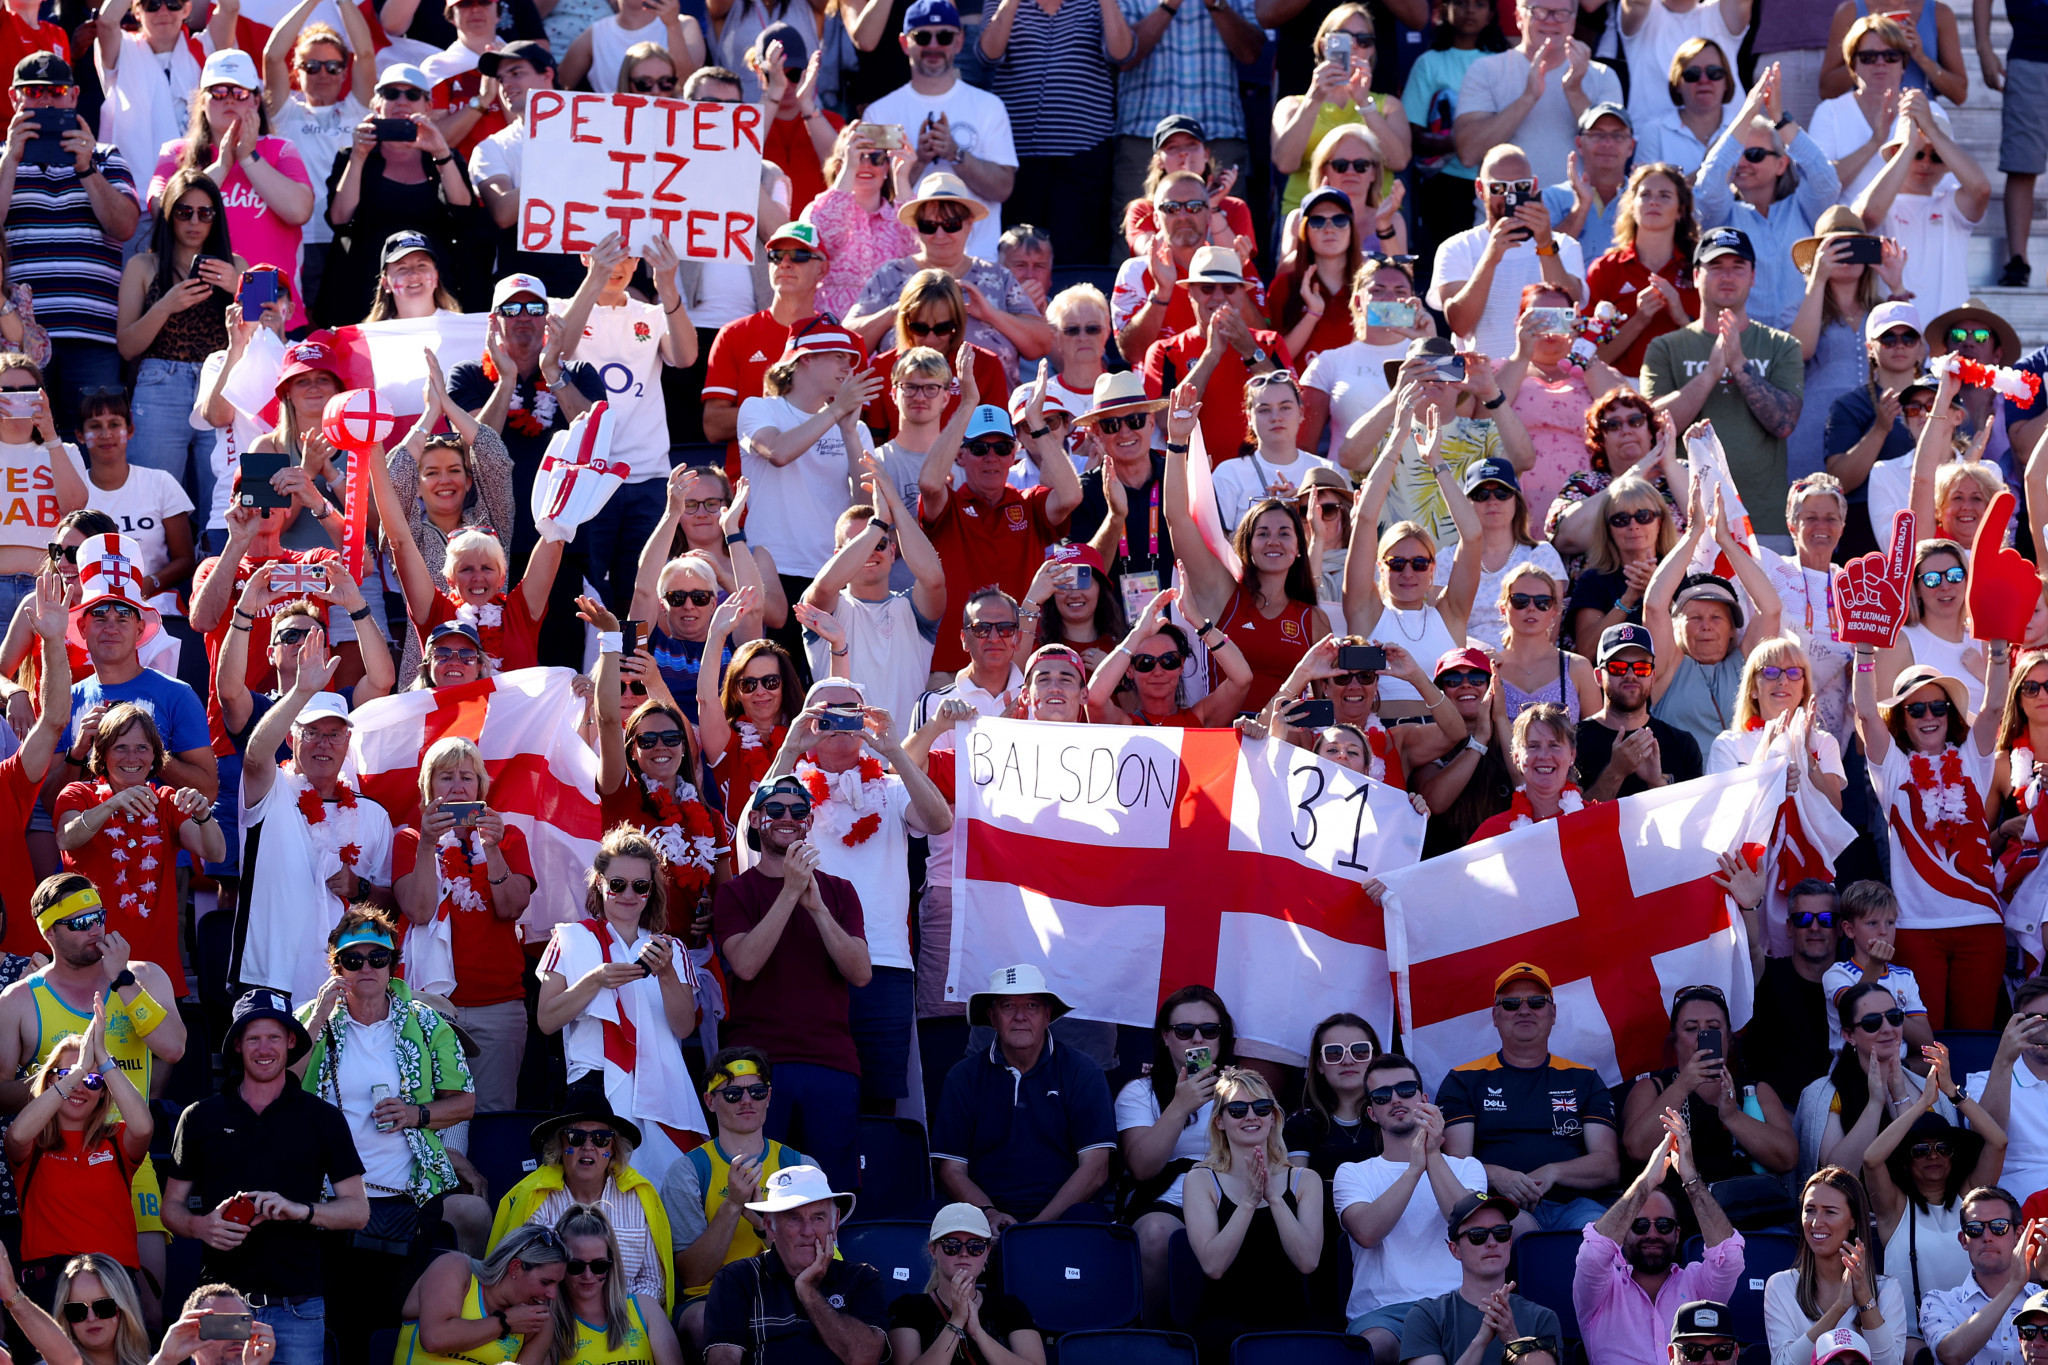 England sent a passionate home crowd into raptures with its historic win at Birmingham 2022 ©Getty Images